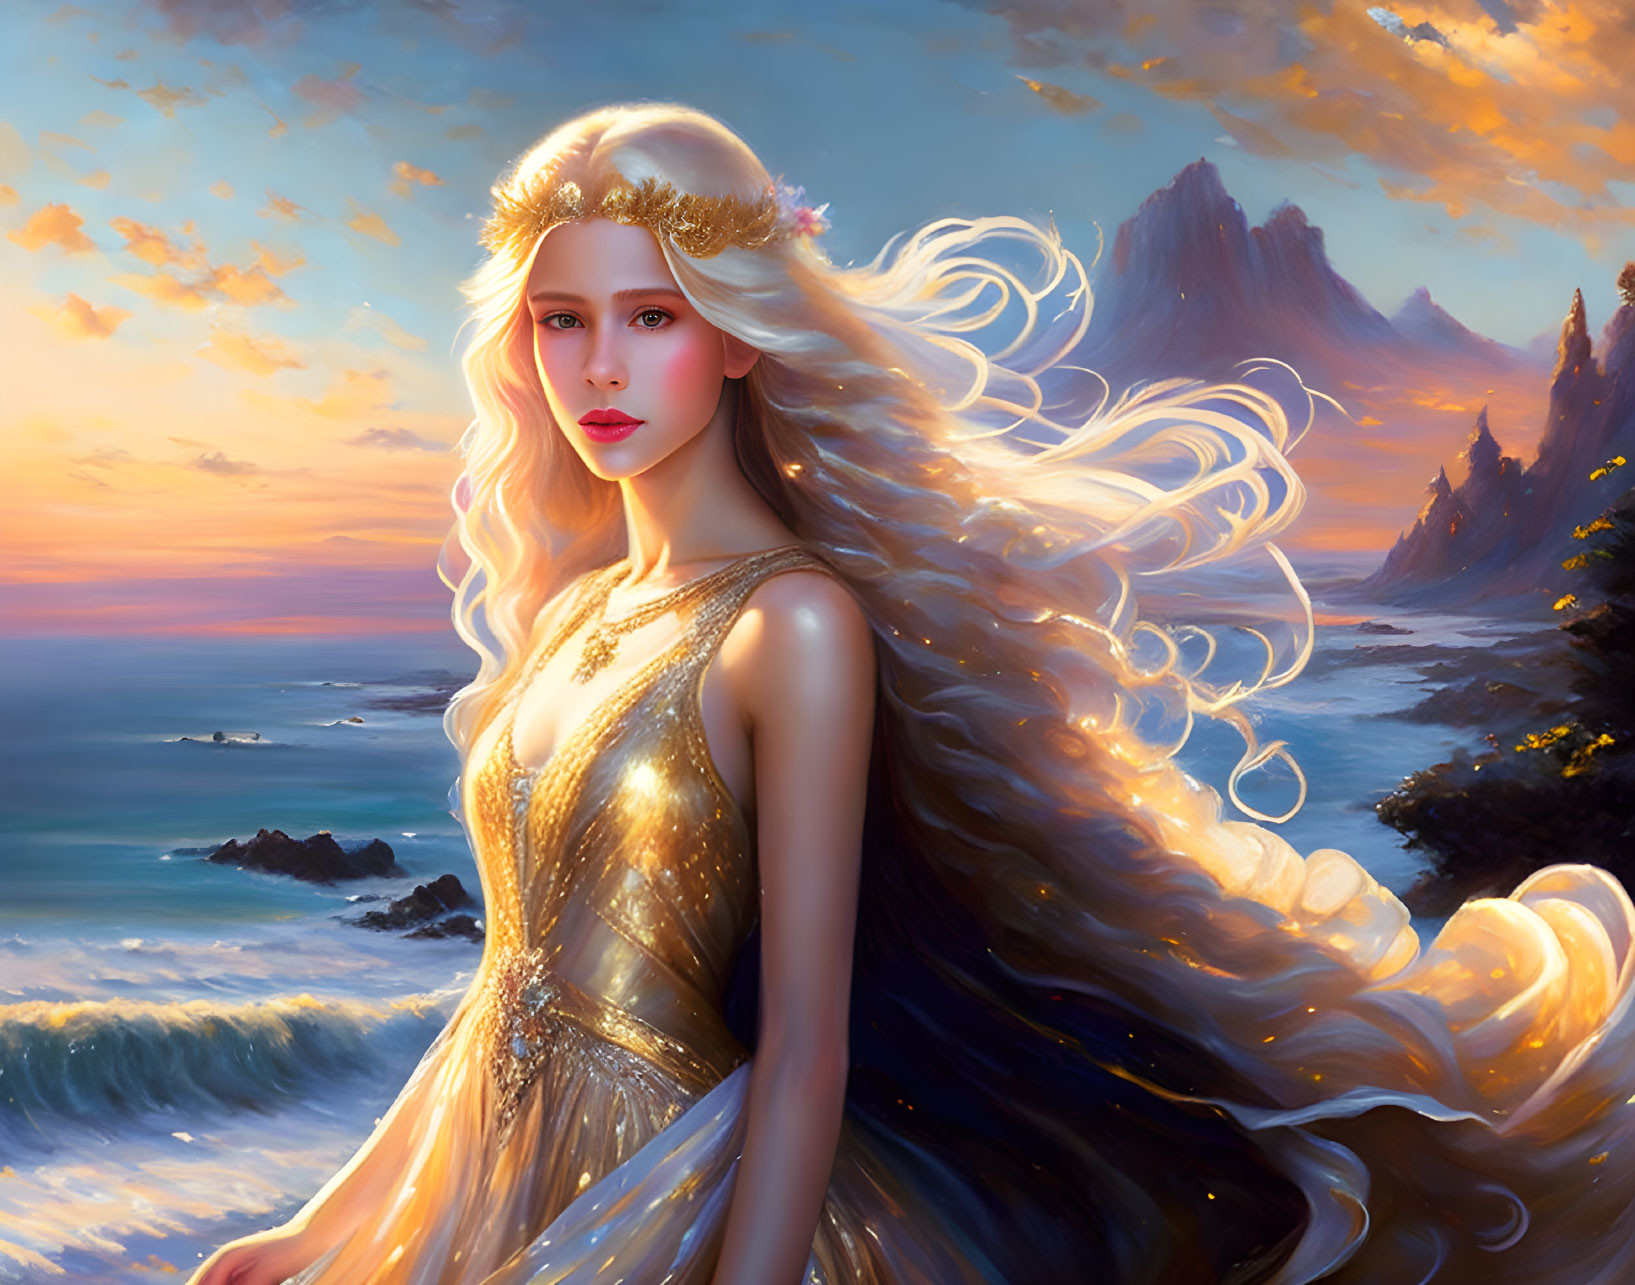 Golden-haired woman in ornate crown by sea at sunset